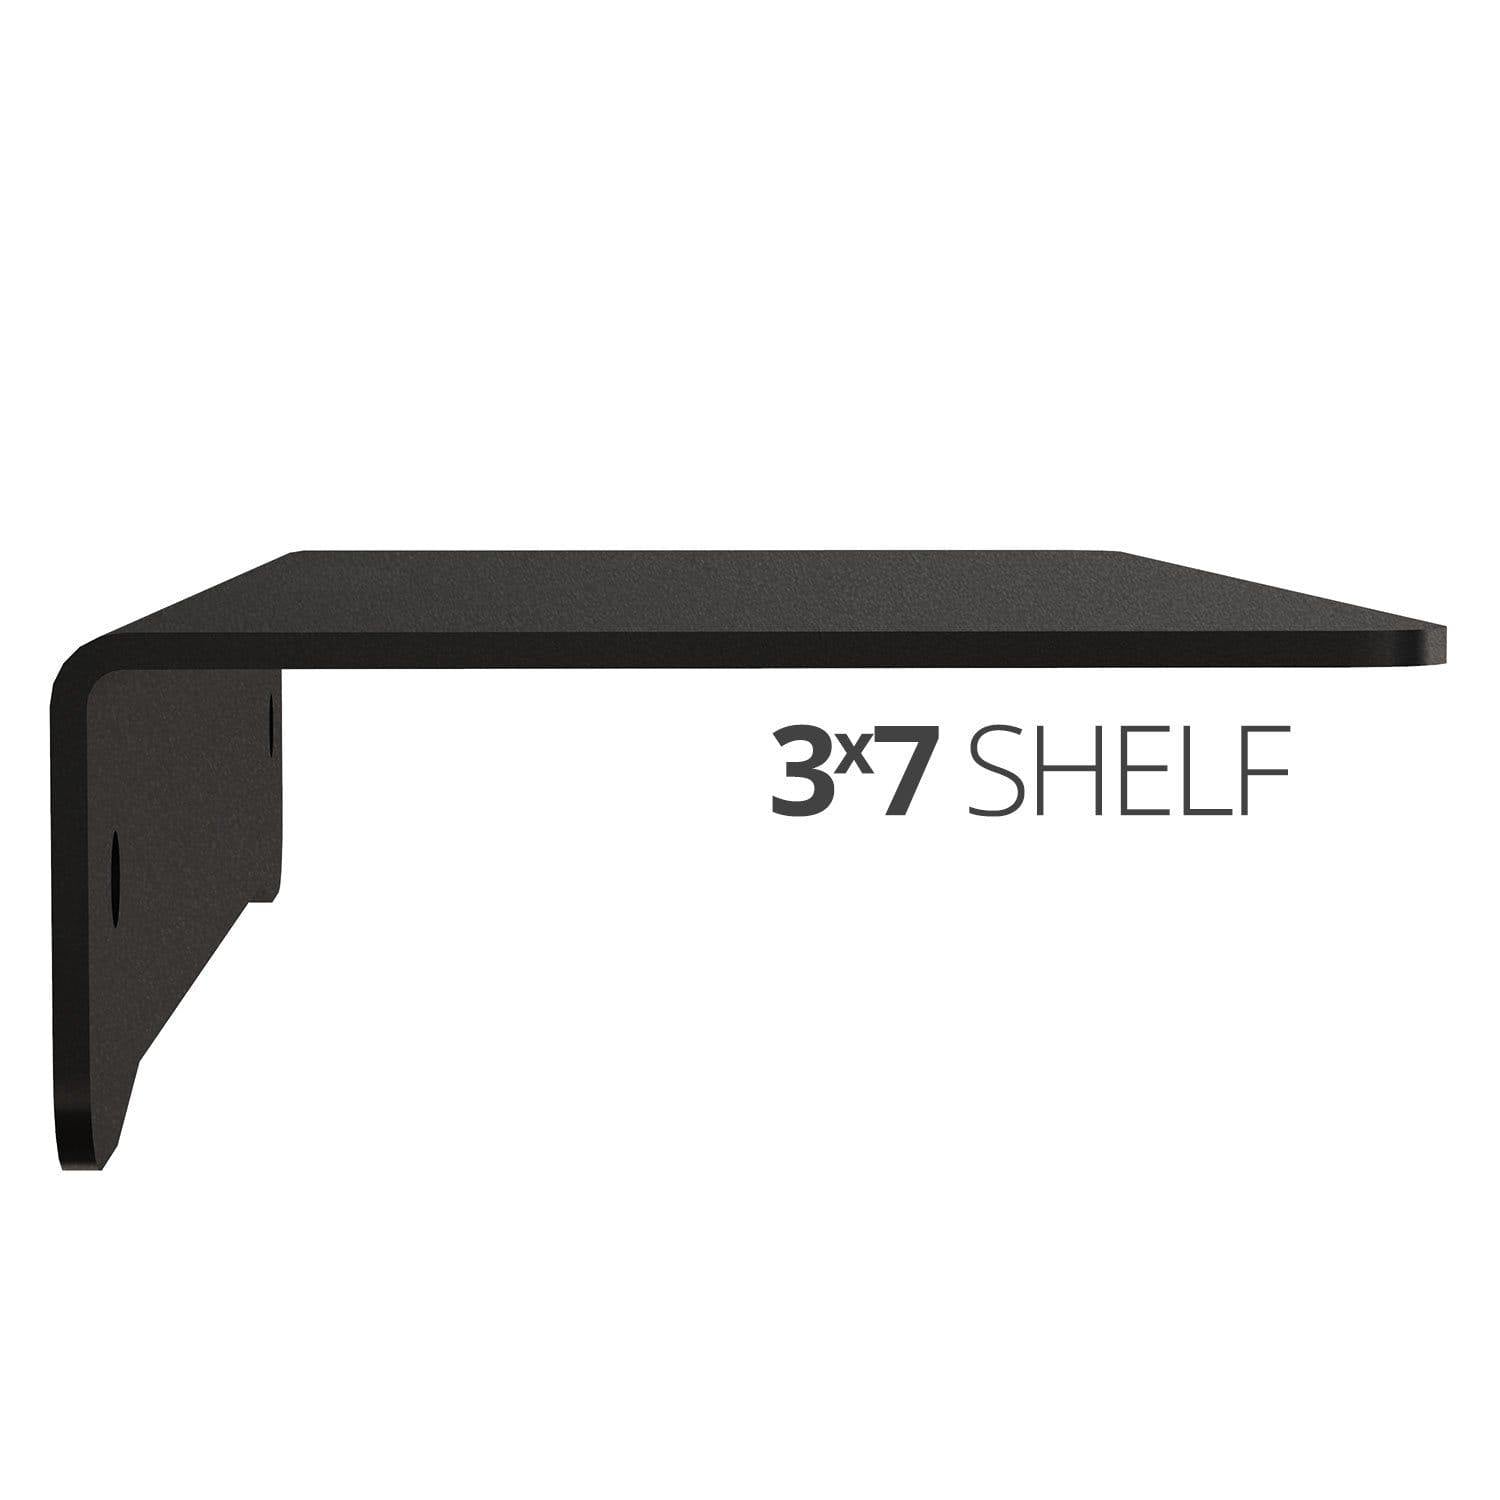 Small wall mounted shelf for home, office and garage - 3x7 side